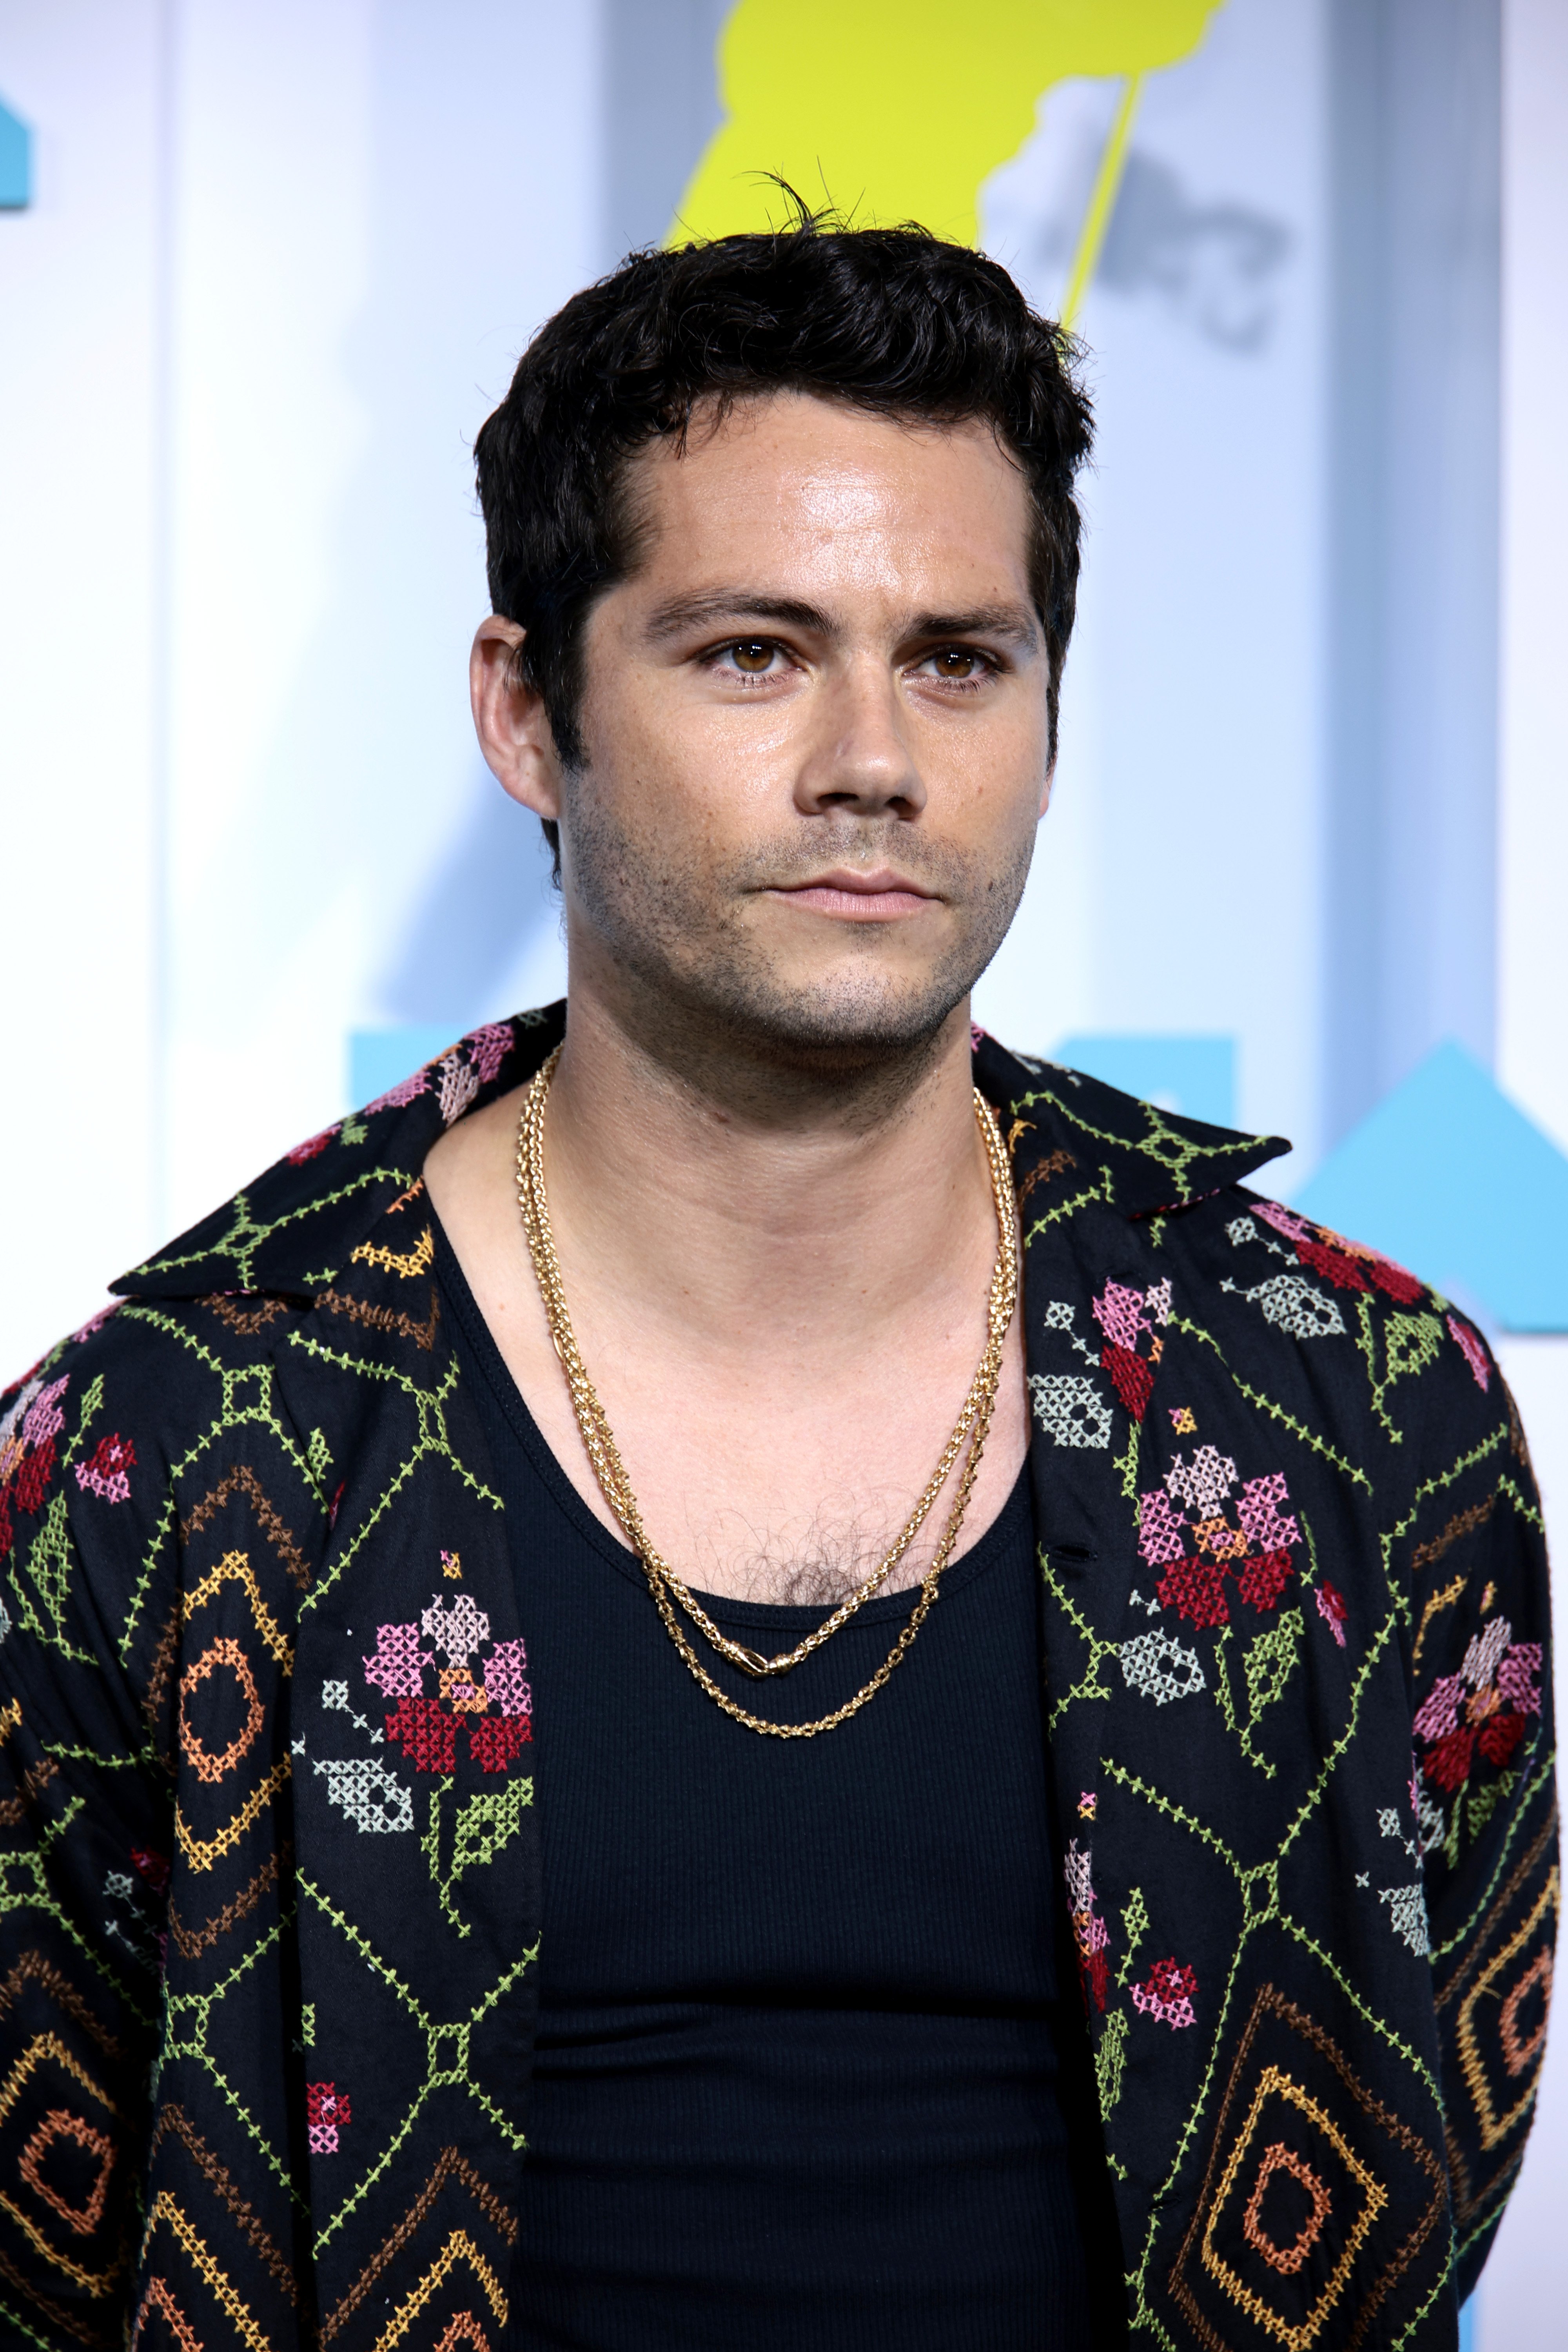 Dylan O'Brien at the 2022 MTV VMAs in New Jersey on August 28, 2022 | Source: Getty Images